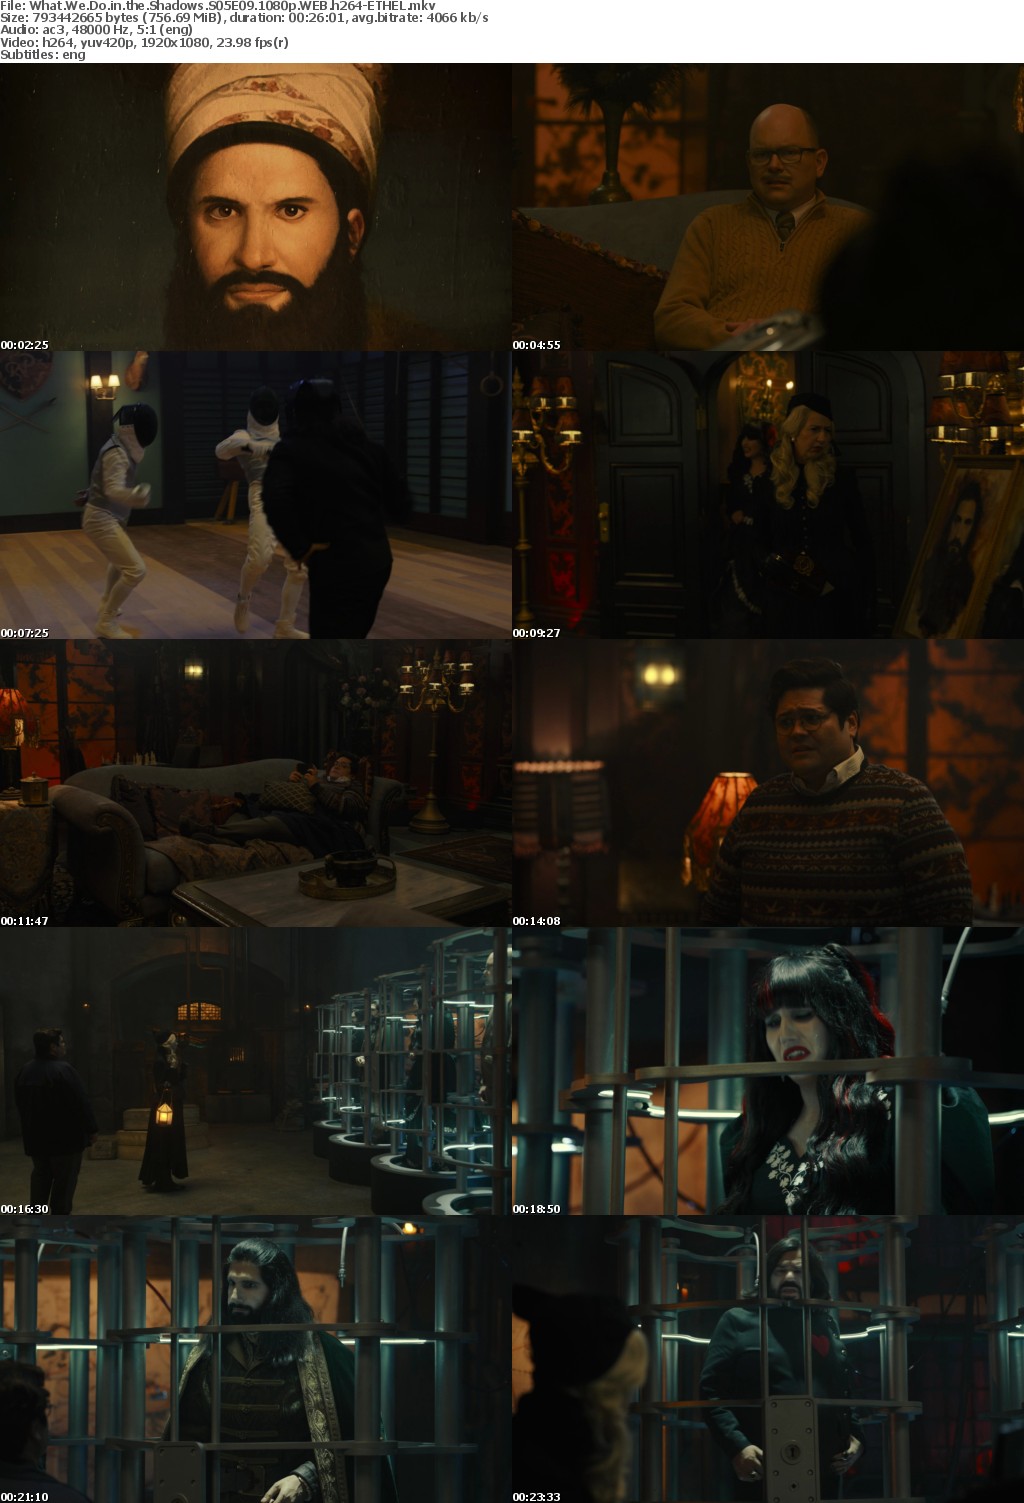 What We Do in the Shadows S05E09 1080p WEB h264-ETHEL